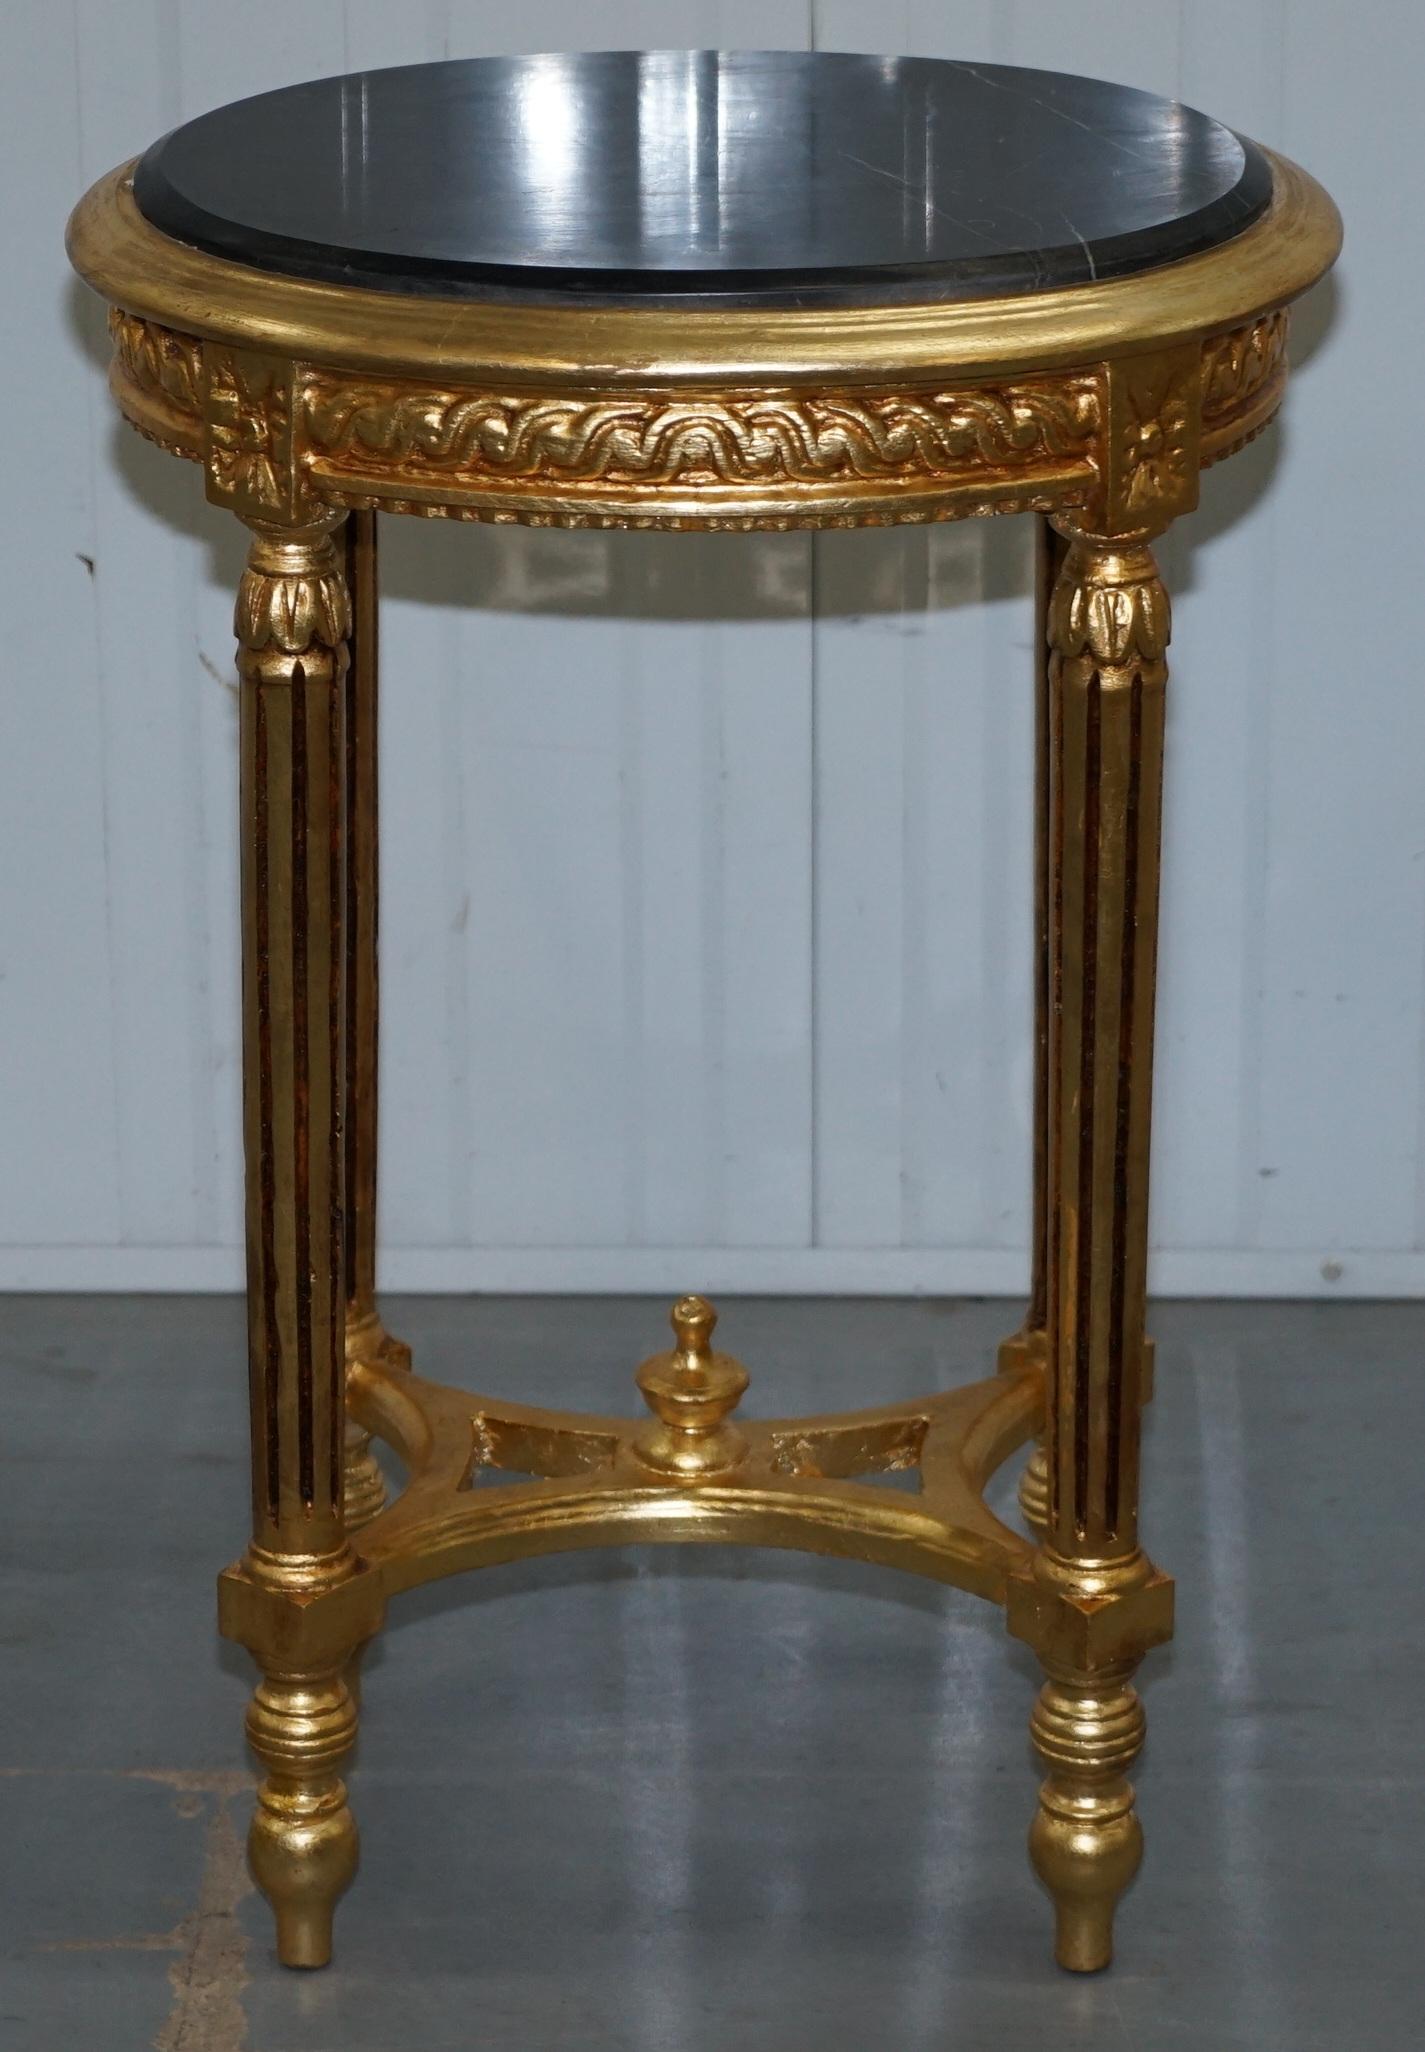 French Provincial Stunning Pair of Antique French Gold Giltwood & Marble Jardiniere Display Stands